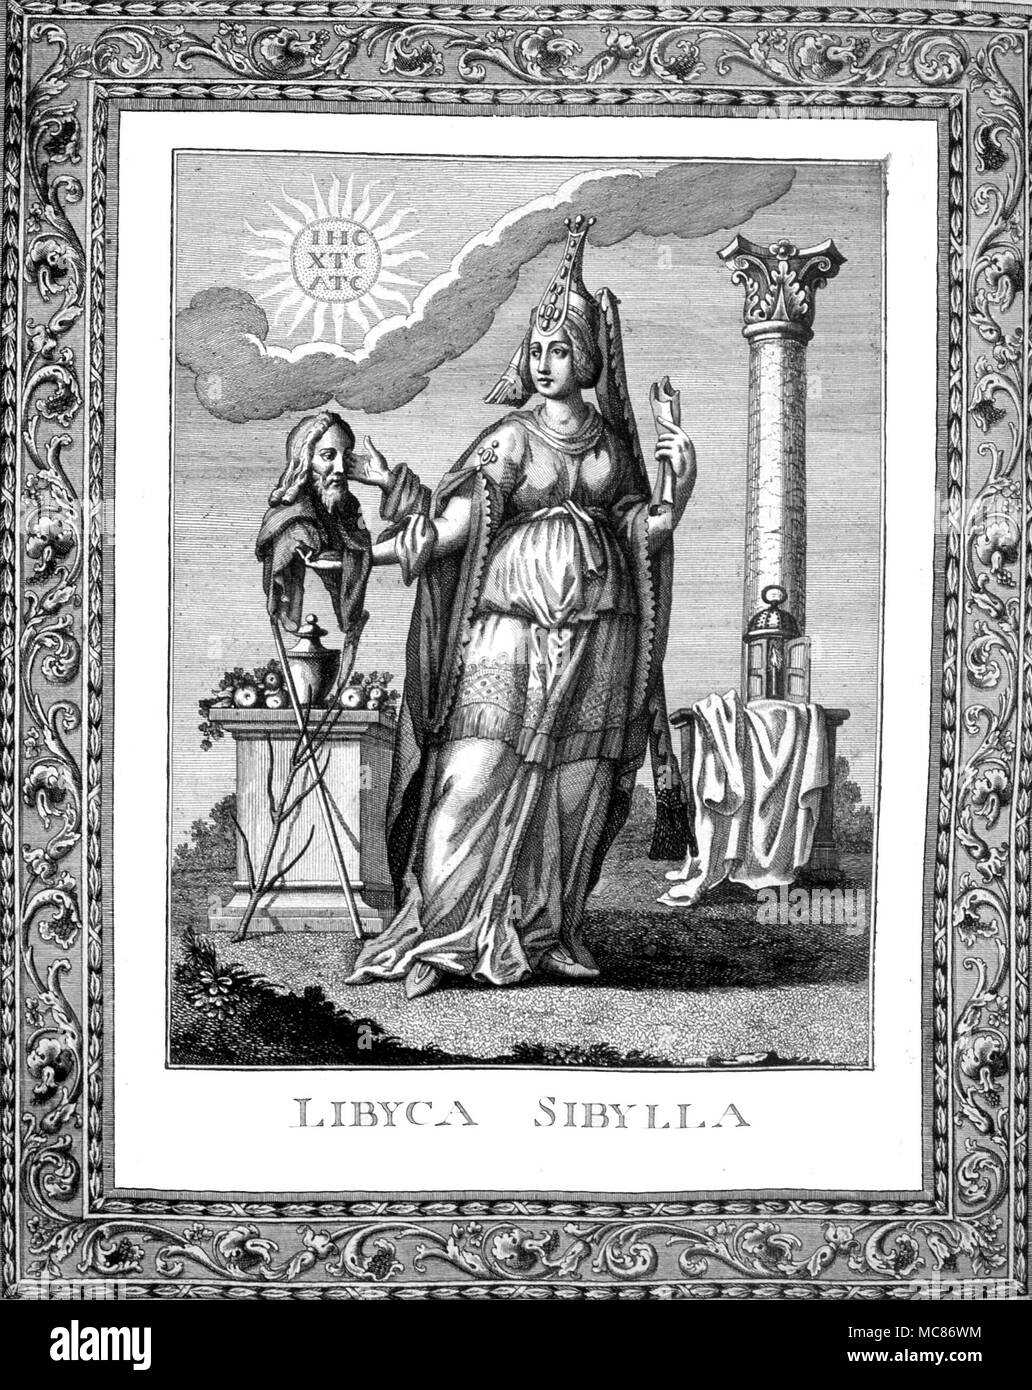 PREDICTIONS AND PROPHECY The Libyan Sybil. From the 1972 Venetian edition, with engravings based on the designs of Jacopo Guarana's Oracoli, Auguri, Aruspici, Sibille, indovinia della Religione Pagana Stock Photo